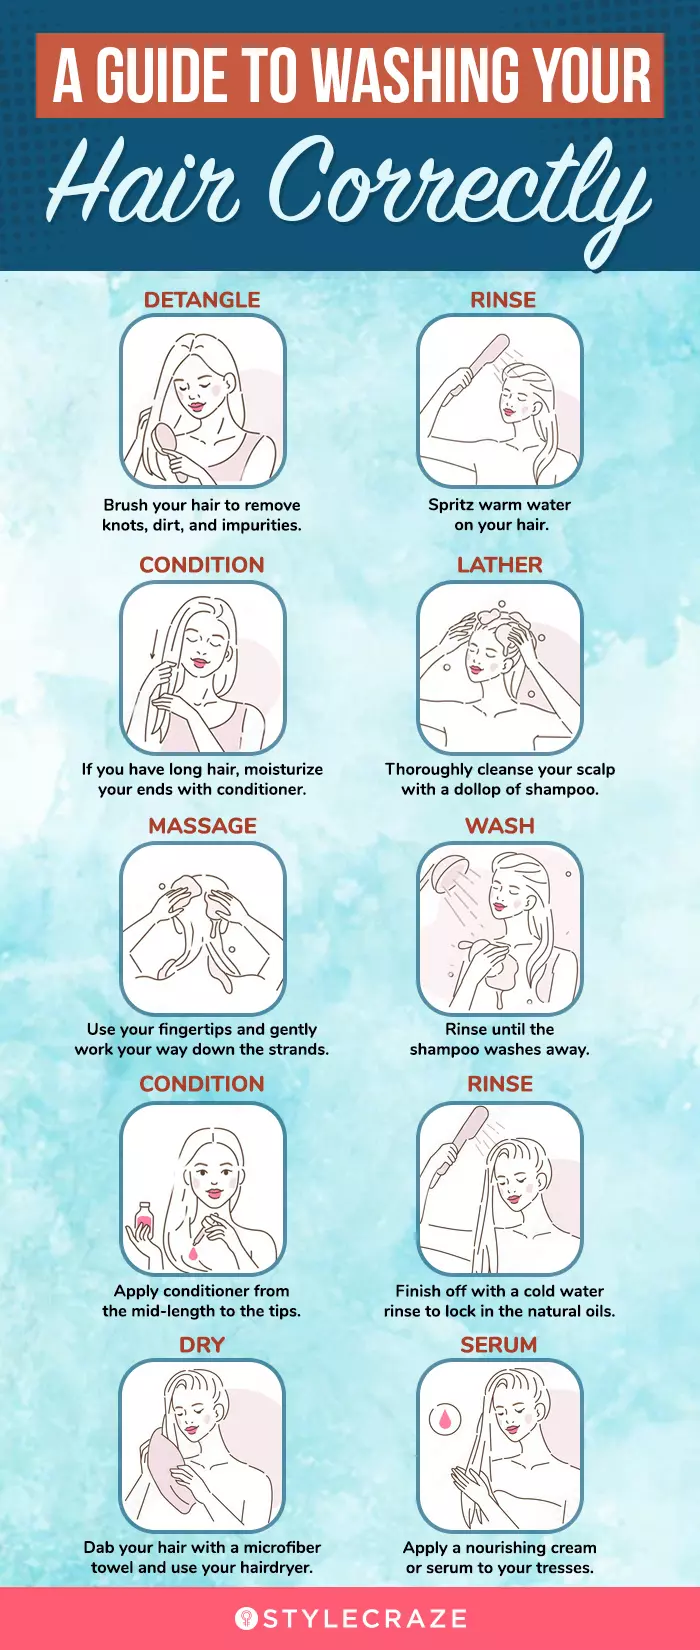 a guide to washing your hair correctly (infographic)